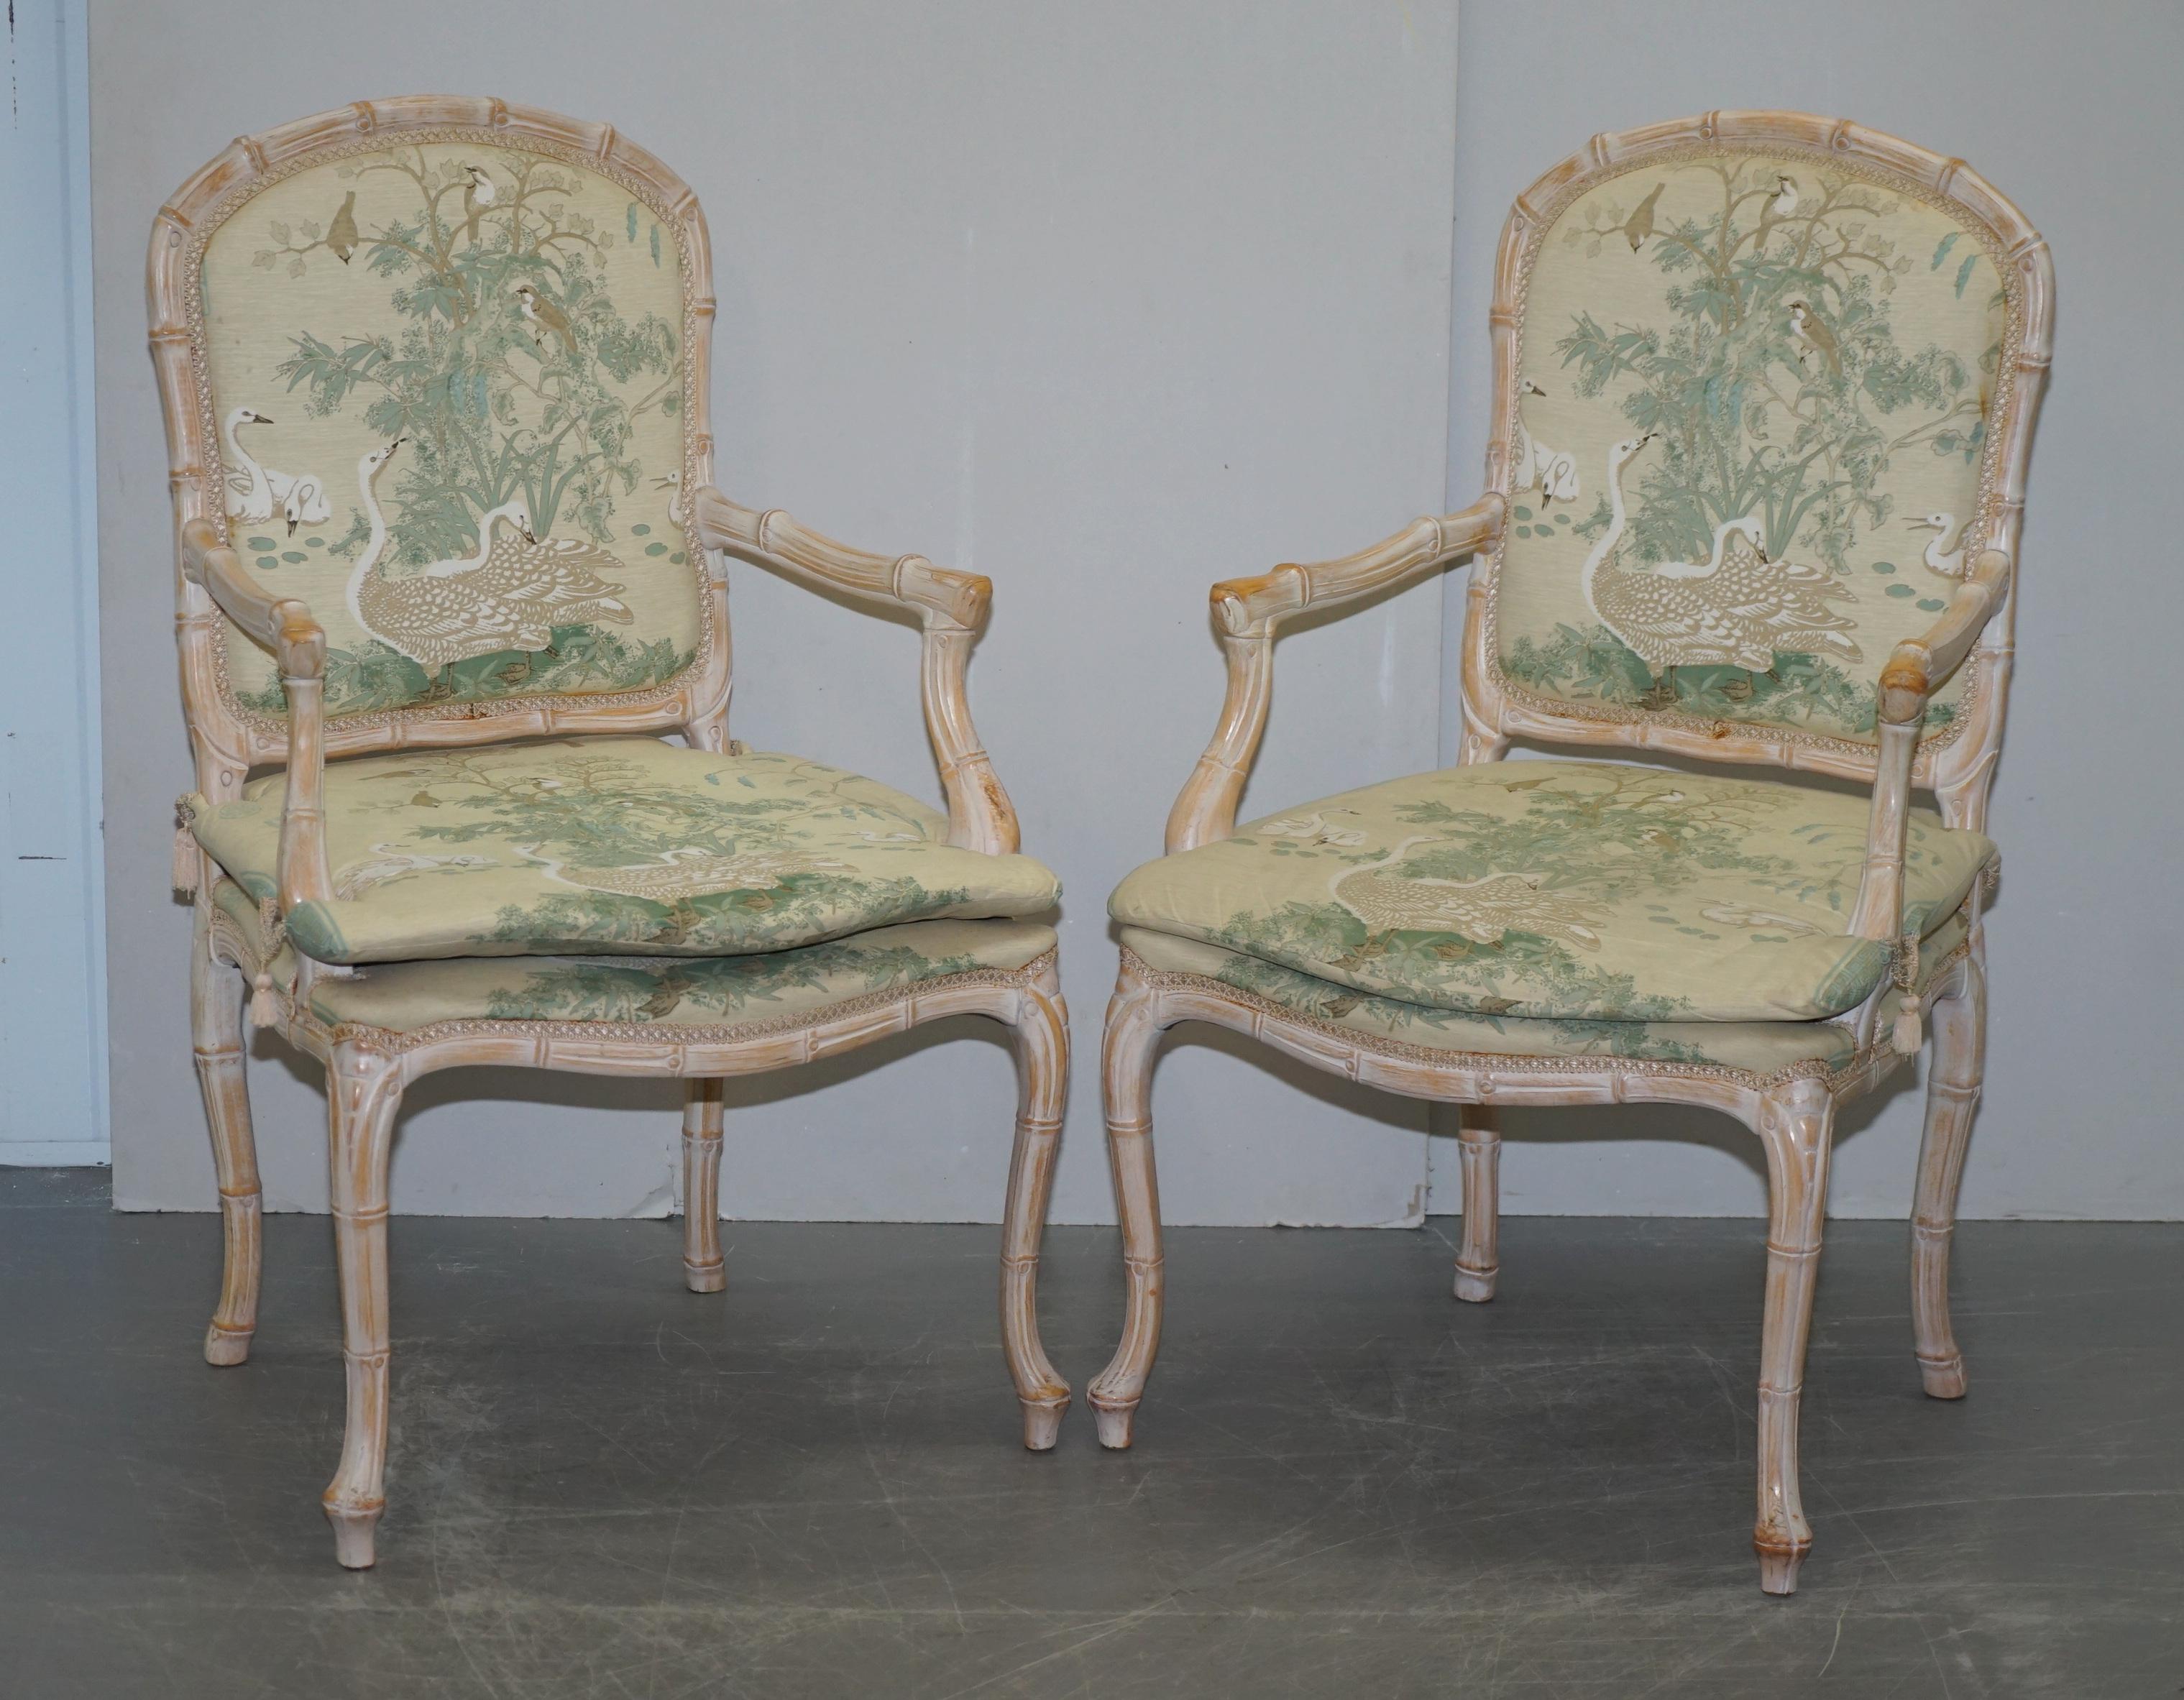 We are delighted to offer for sale this vintage suite of mid-century Famboo framed dining chairs with Swan, Bird & Floral upholstery

A very good looking well made and decorative suite of chairs. This design goes back hundreds of years to George